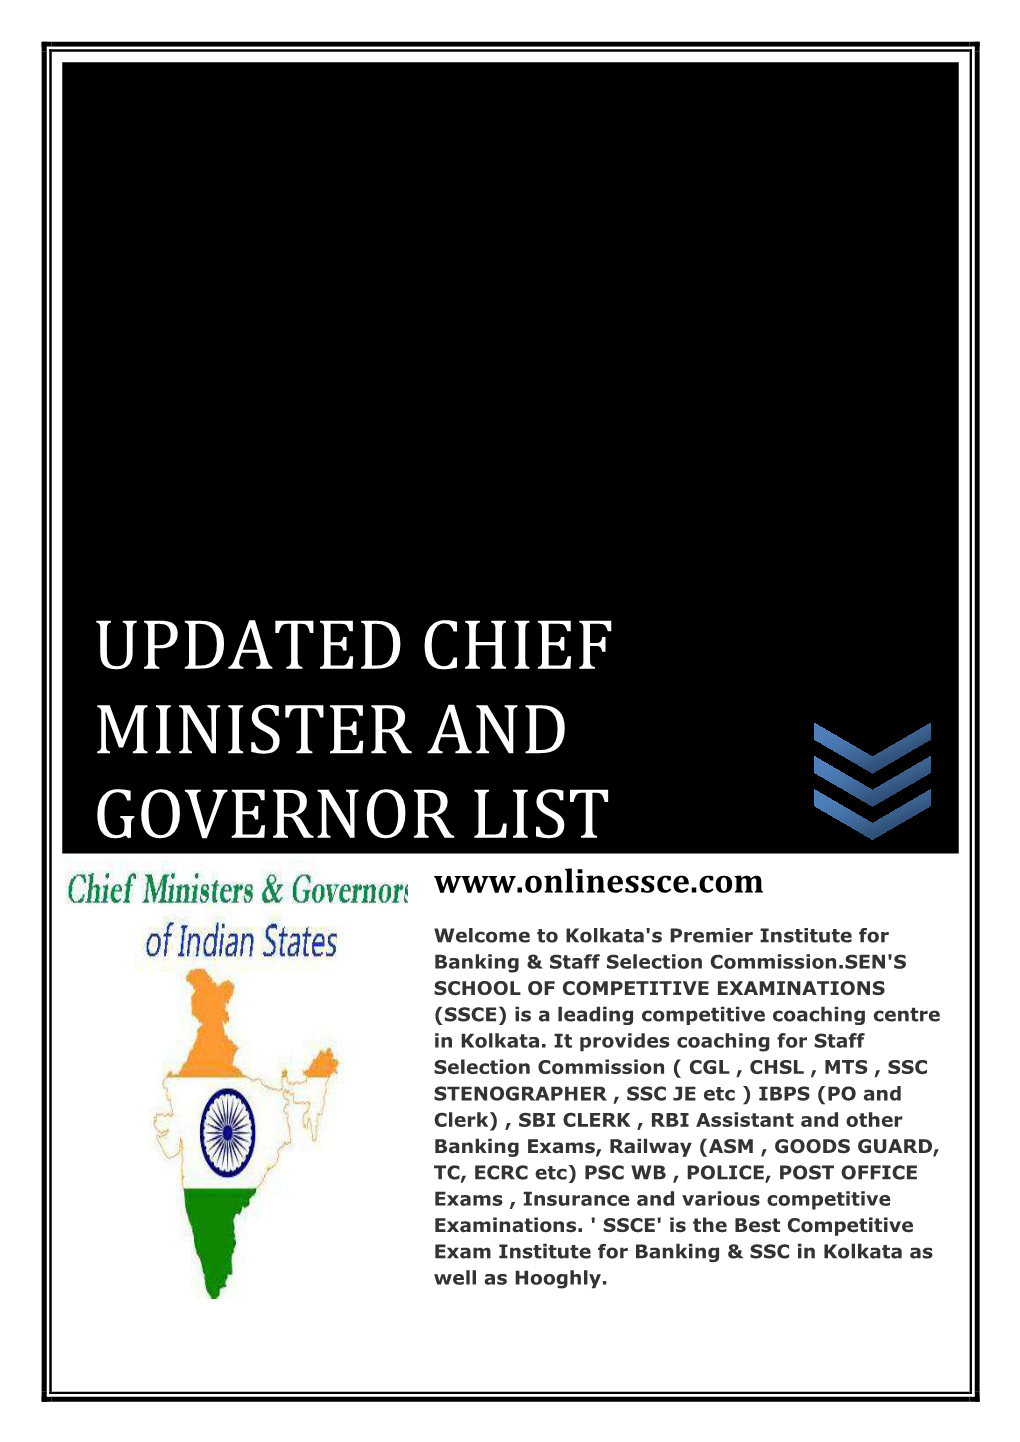 Updated Chief Minister and Governor List